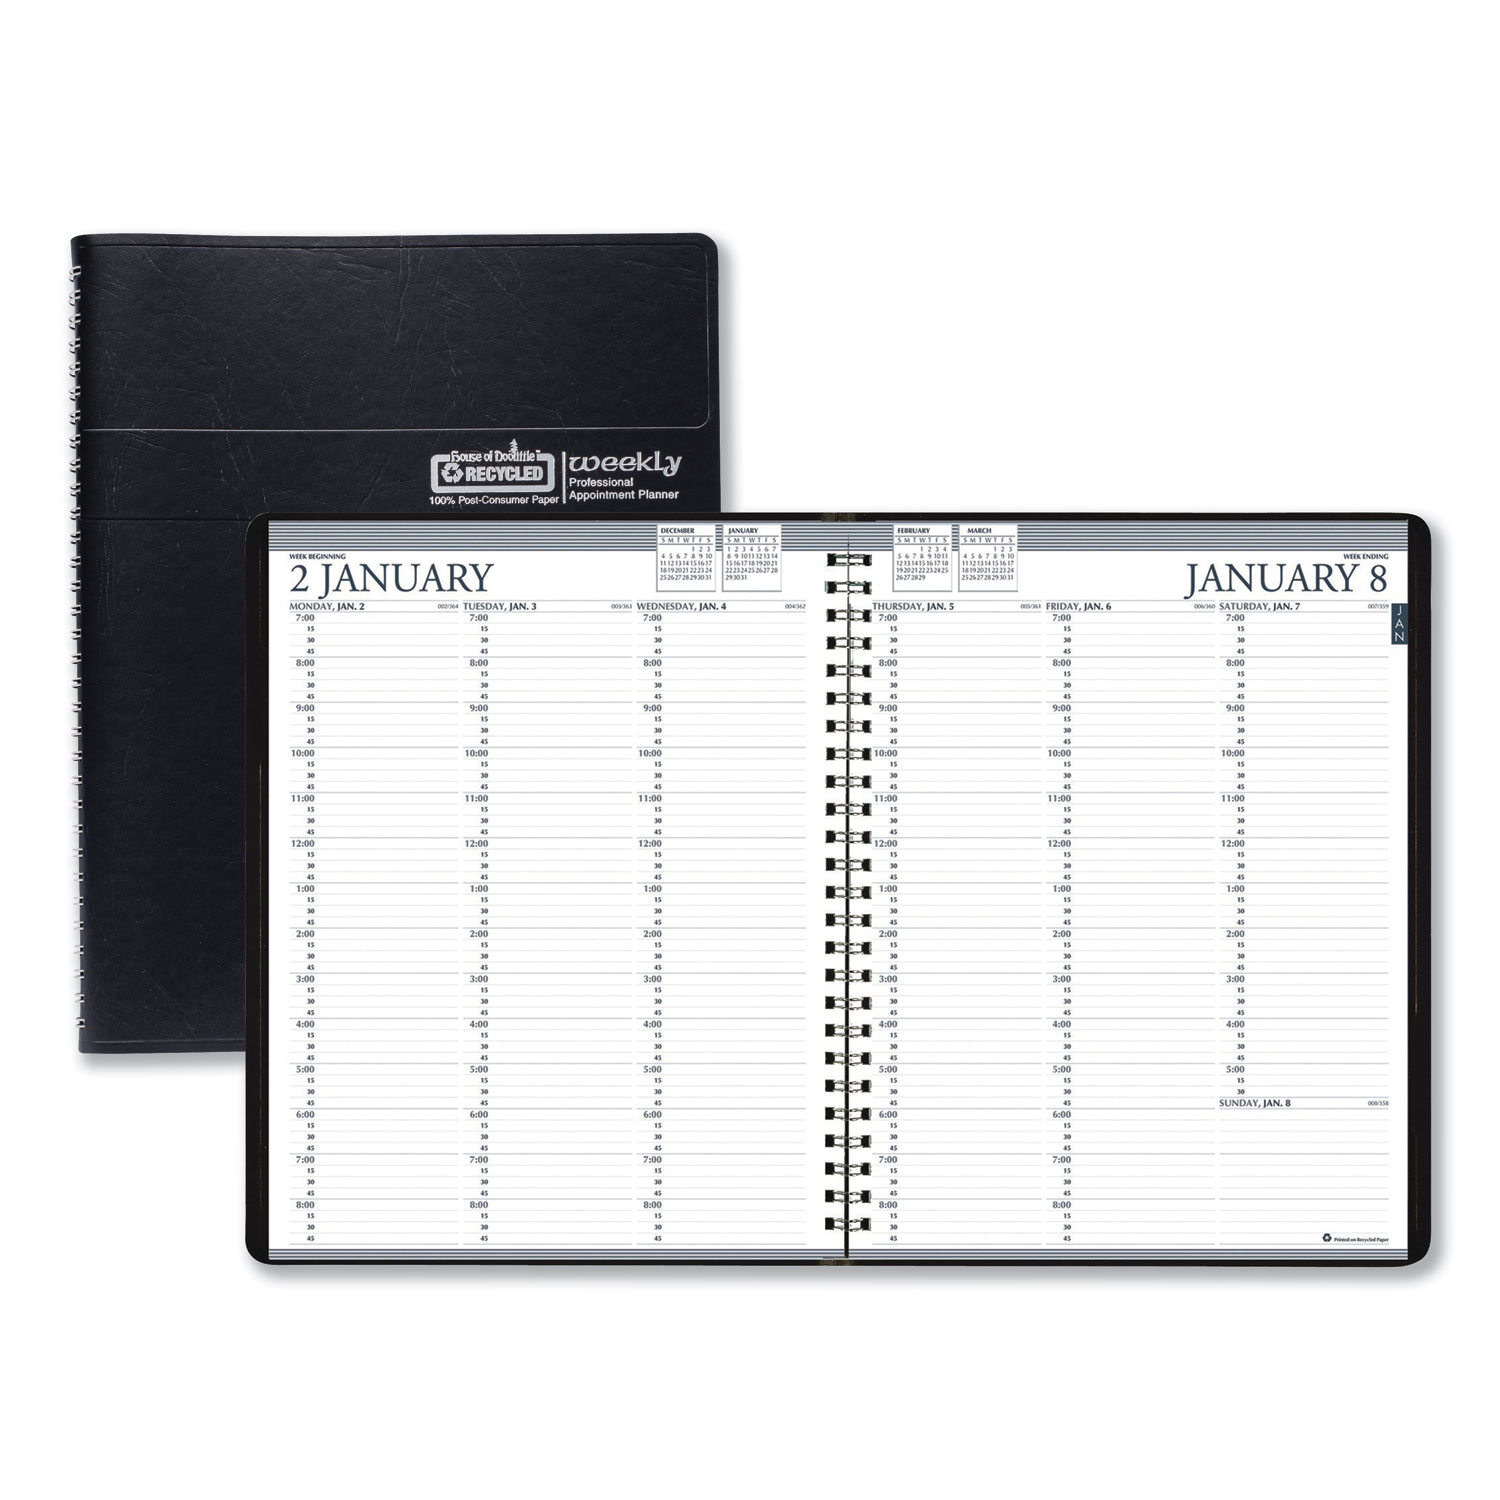  House of Doolittle 272-02 Recycled Professional Weekly Planner, 15-Min Appointments, 11 x 8 1/2, Black, 2020 (HOD27202) 